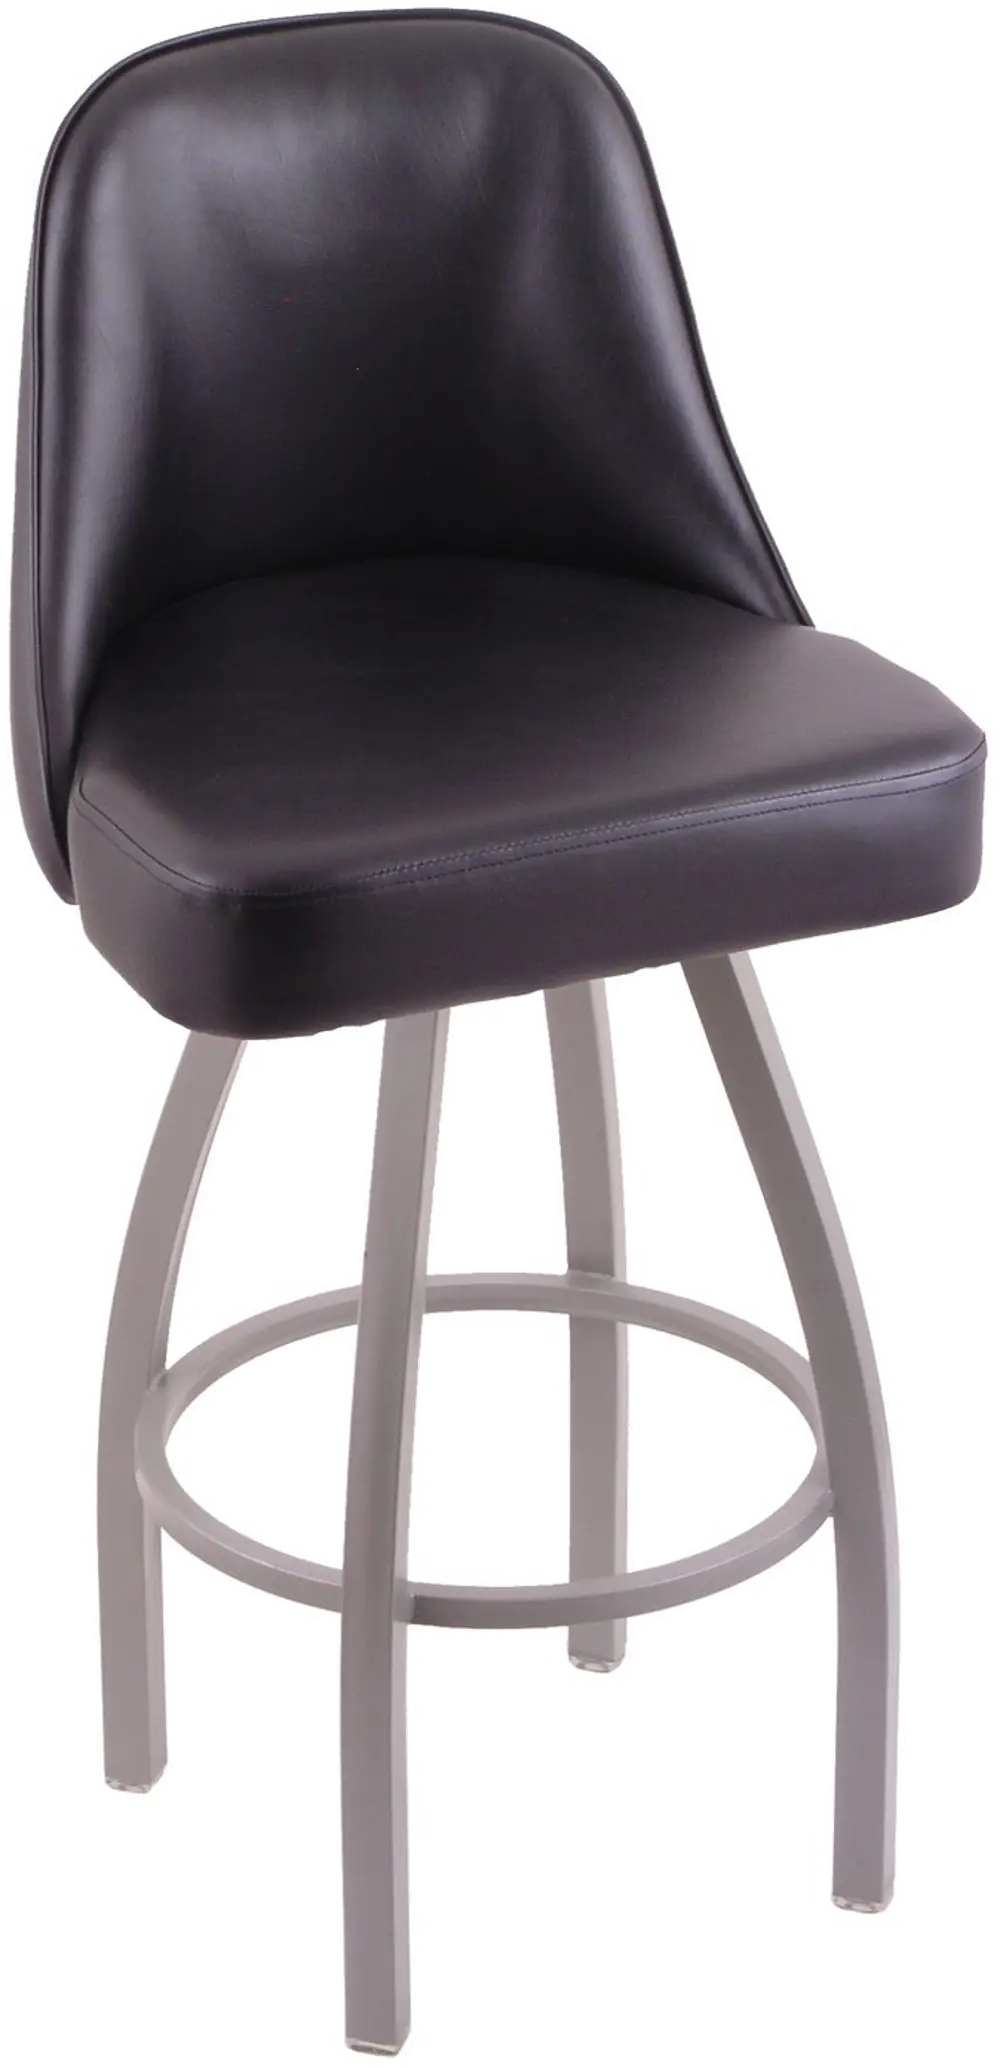 Grizzly Black Upholstered Swivel Extra Tall Bar Stool-1